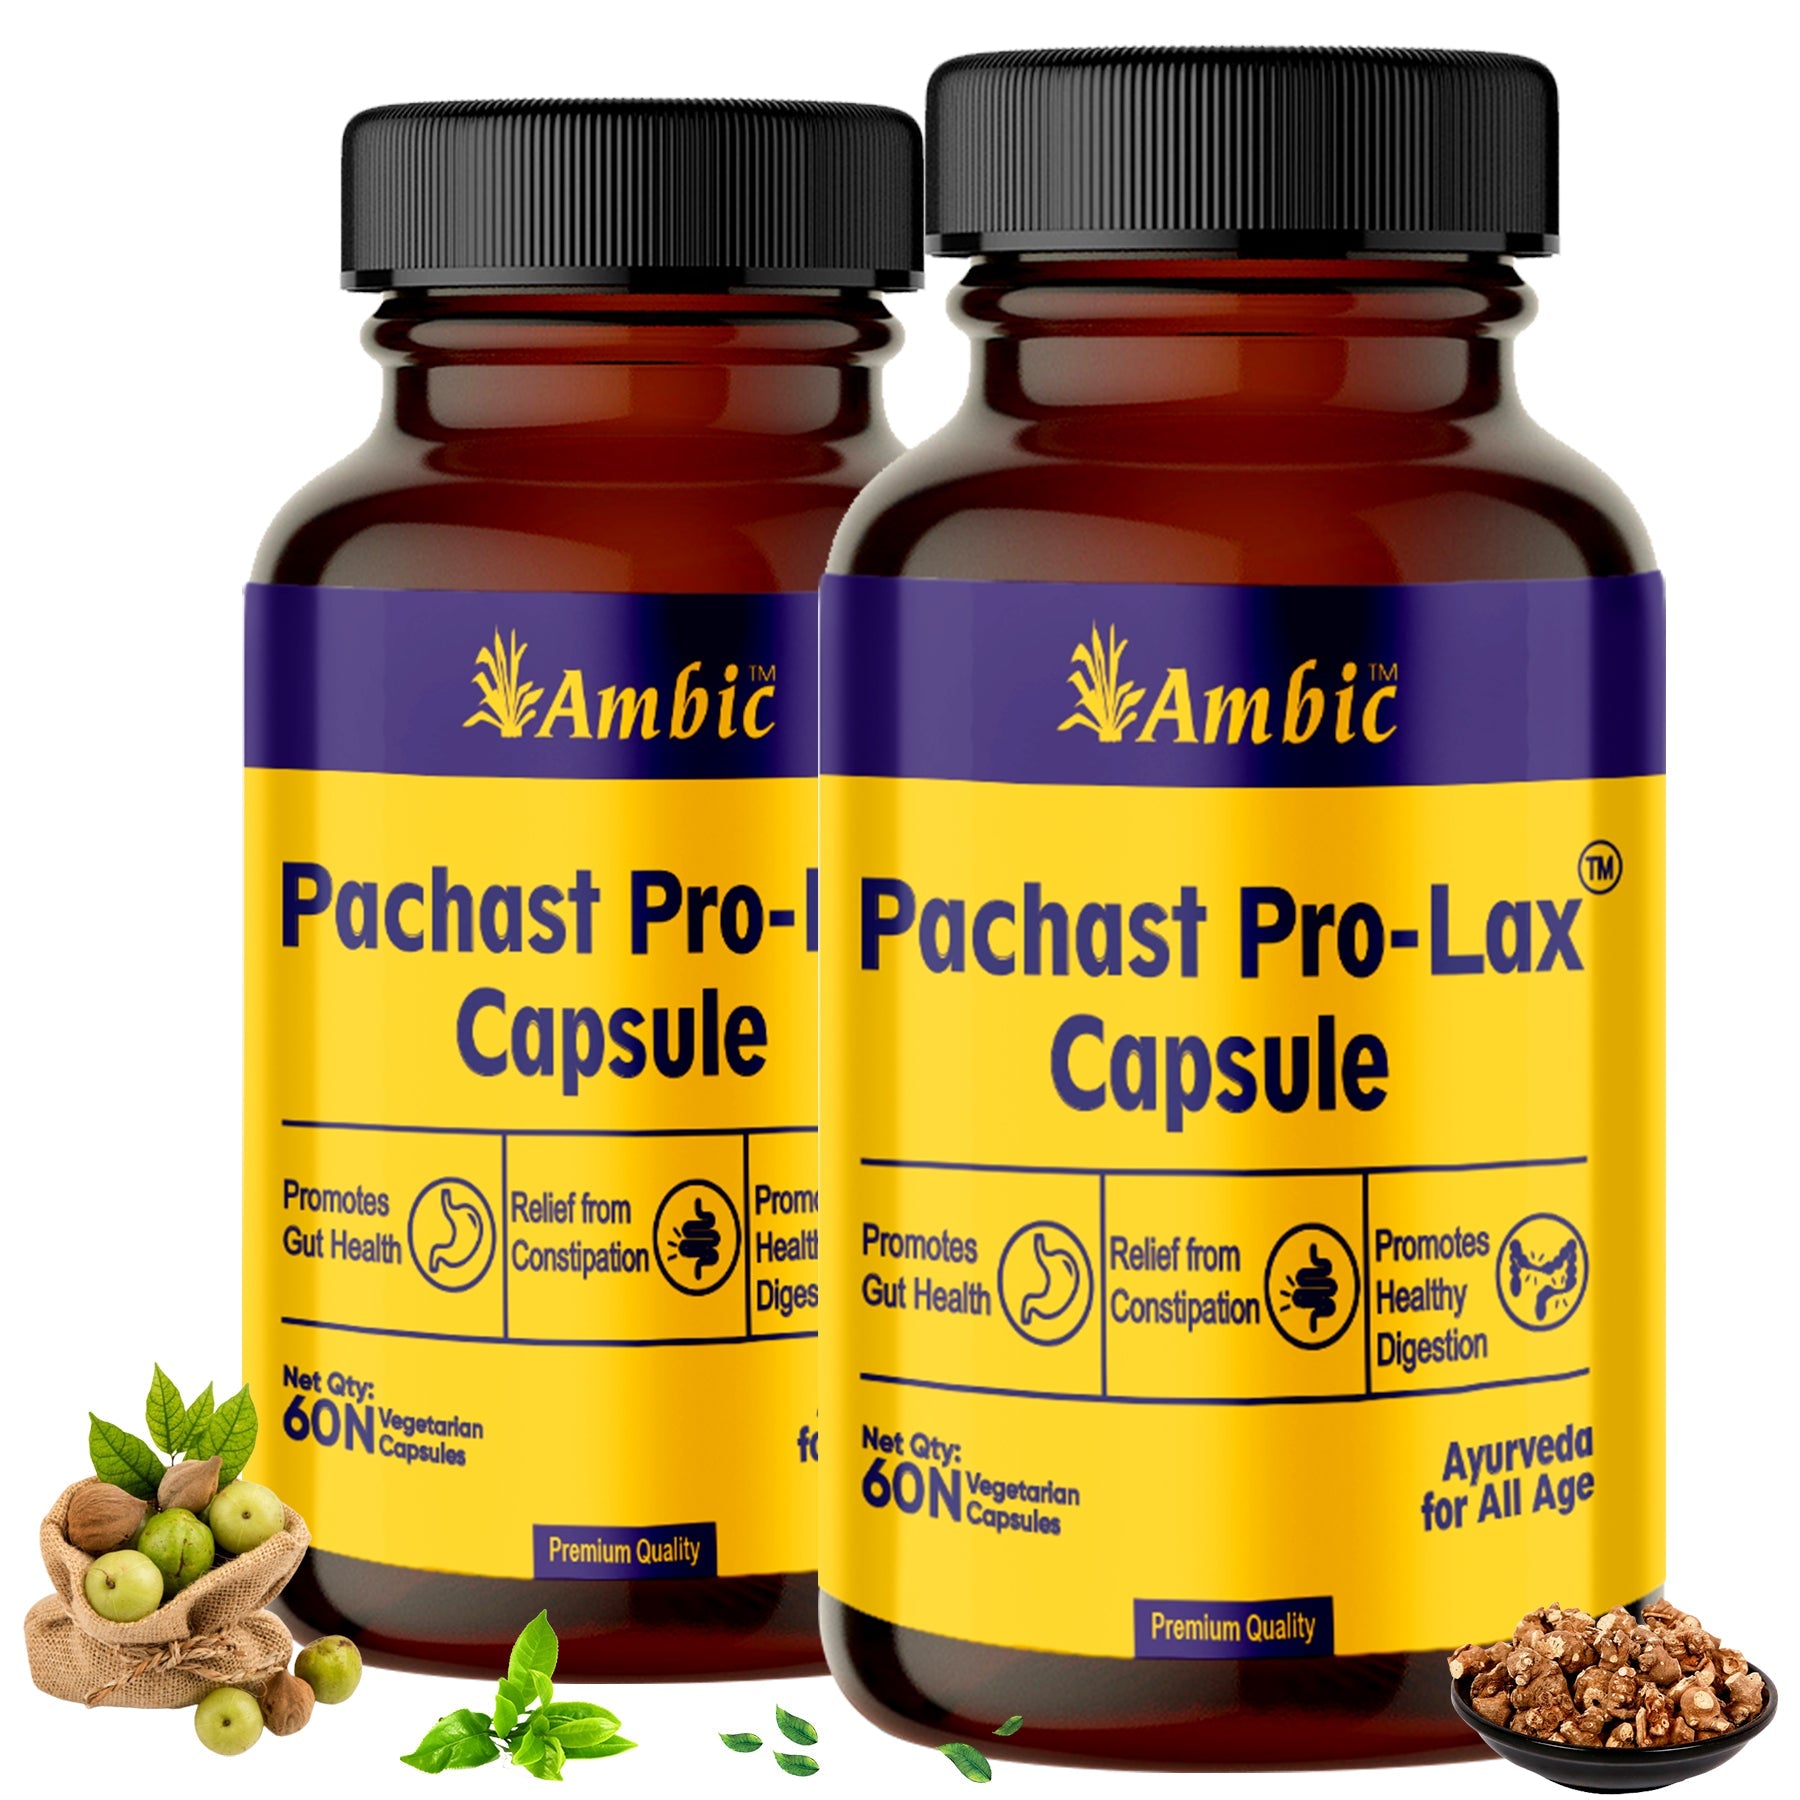 AMBIC PACHAST Pro-Lax Capsules Constipation Relief Medicine - 120 Capsule for Acidity Relief, Bloating and Gas Relief,Digestive Enzymes by Triphala Powder (Pack of 1)